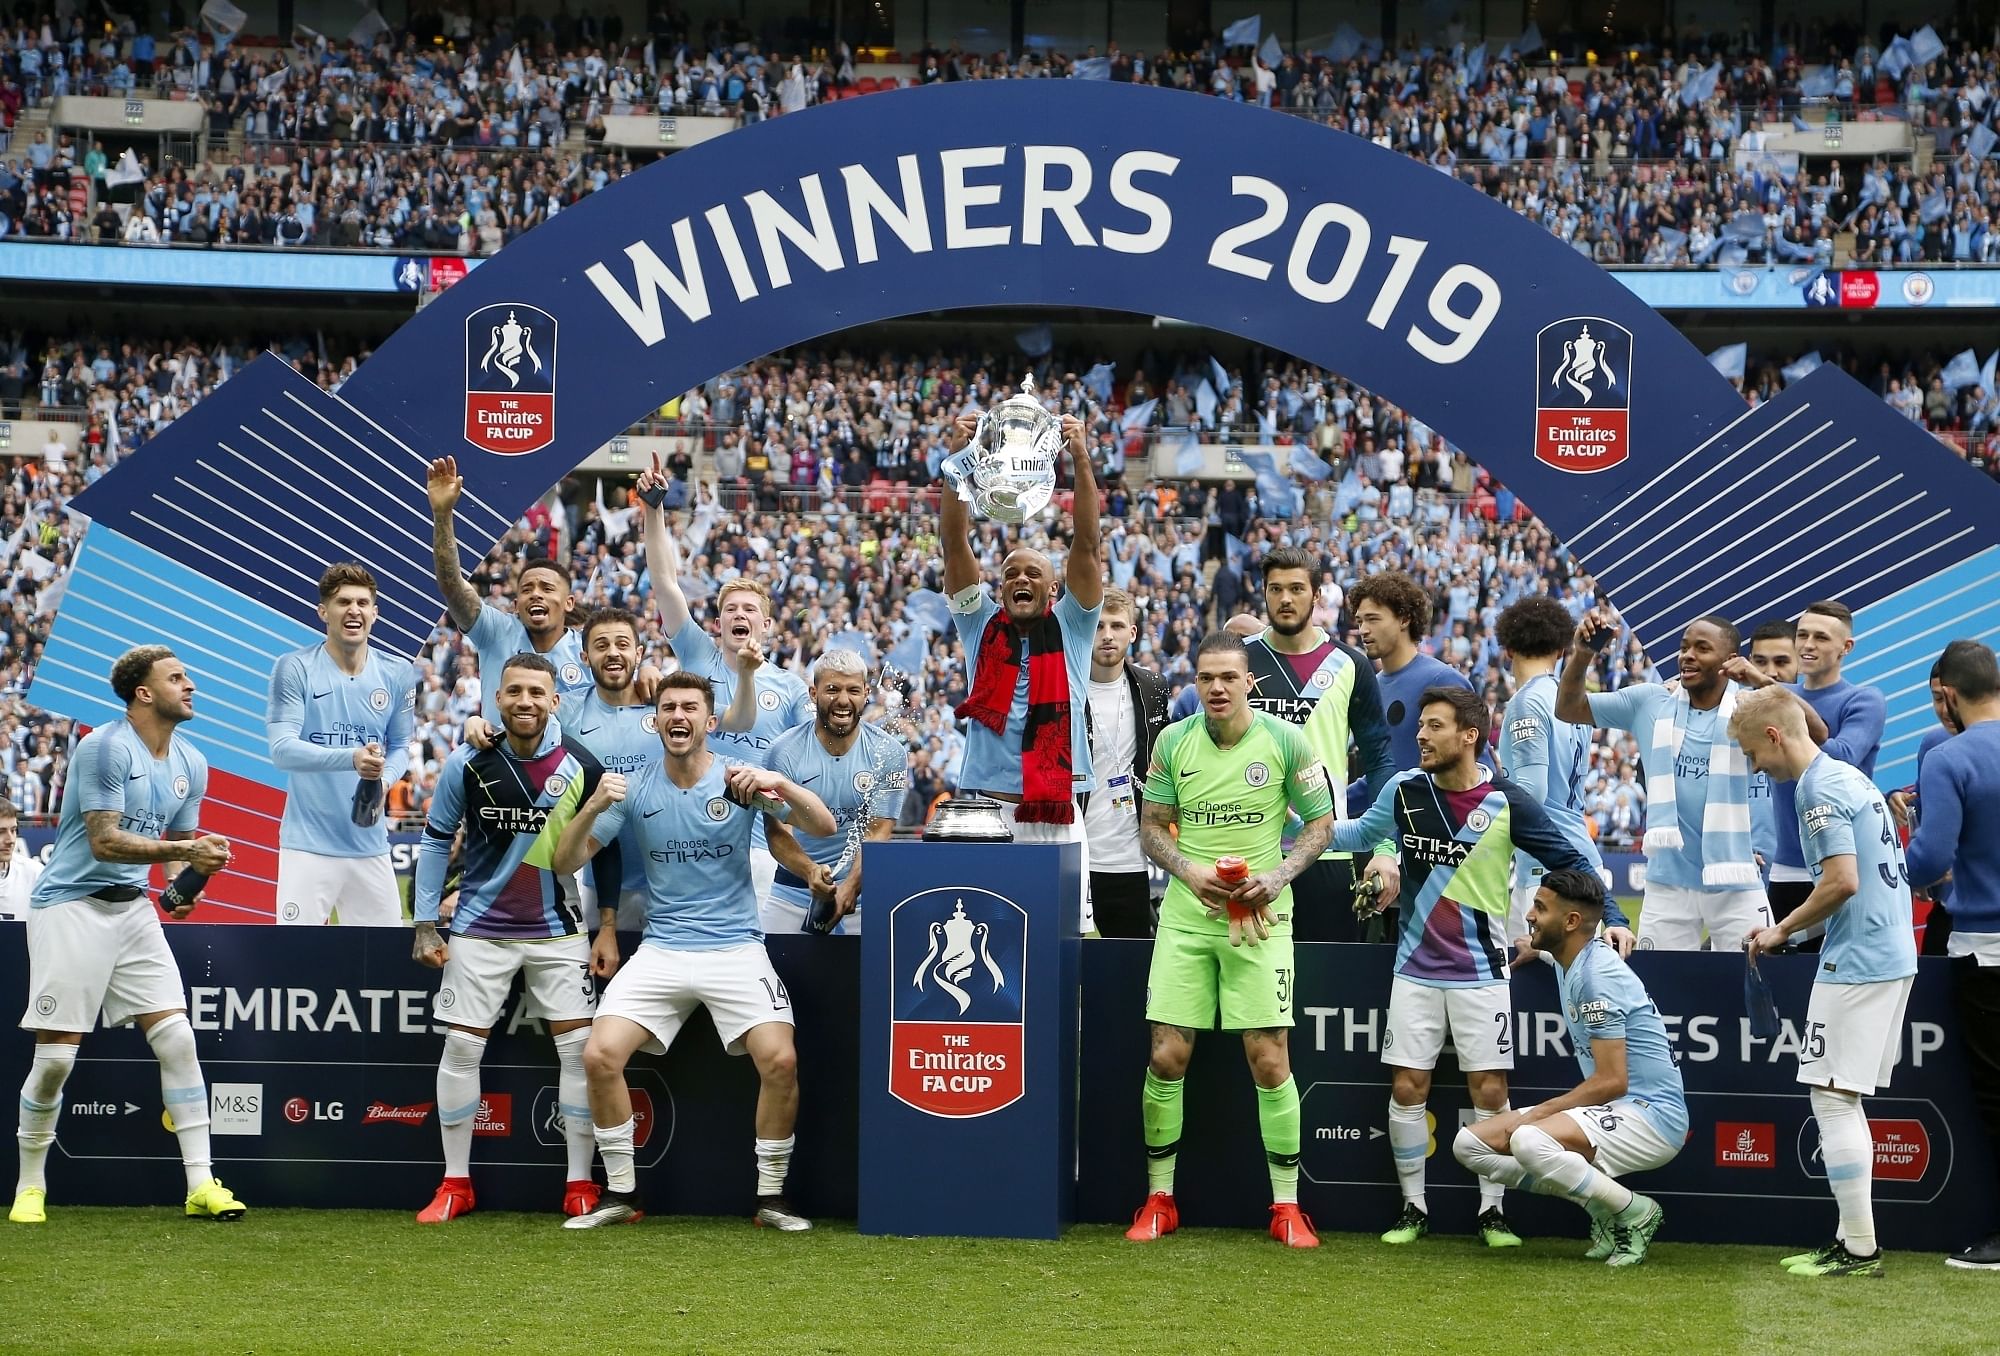 Manchester City handed Watford a 6-0 hiding in the FA Cup final to complete an unprecedented domestic treble.